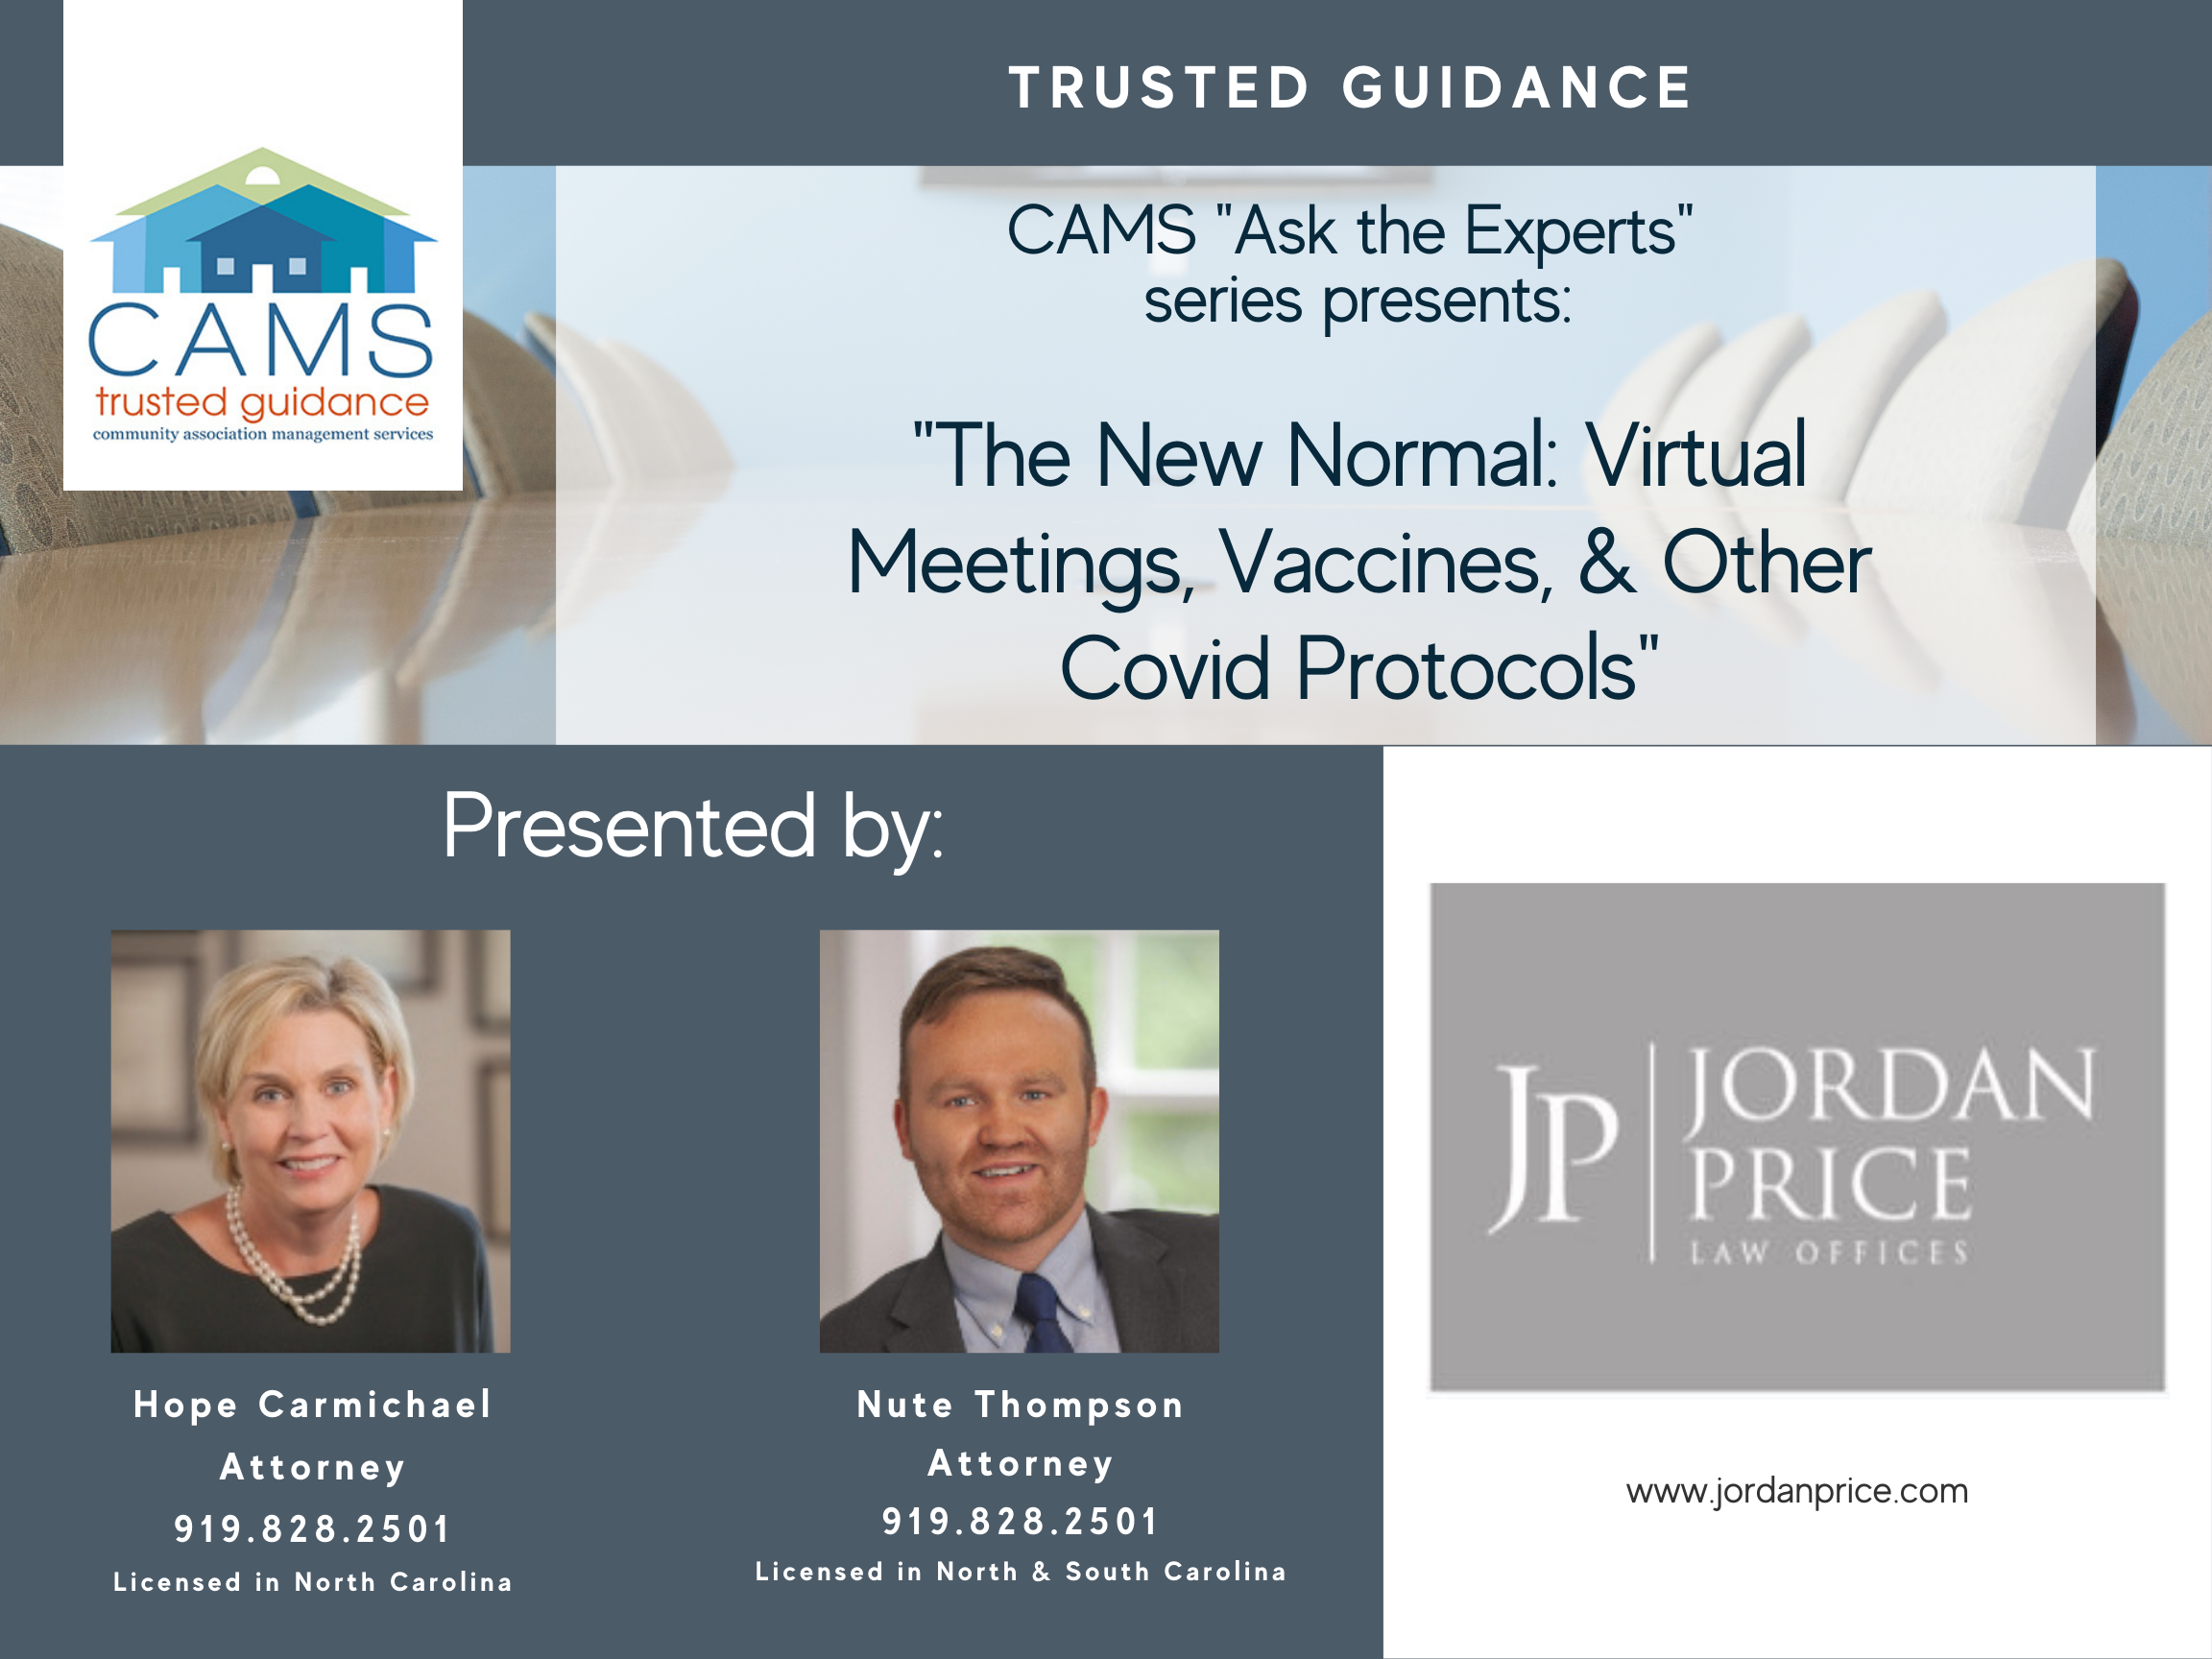 The New Normal: Virtual Meetings, Vaccines, & Other Covid Protocols